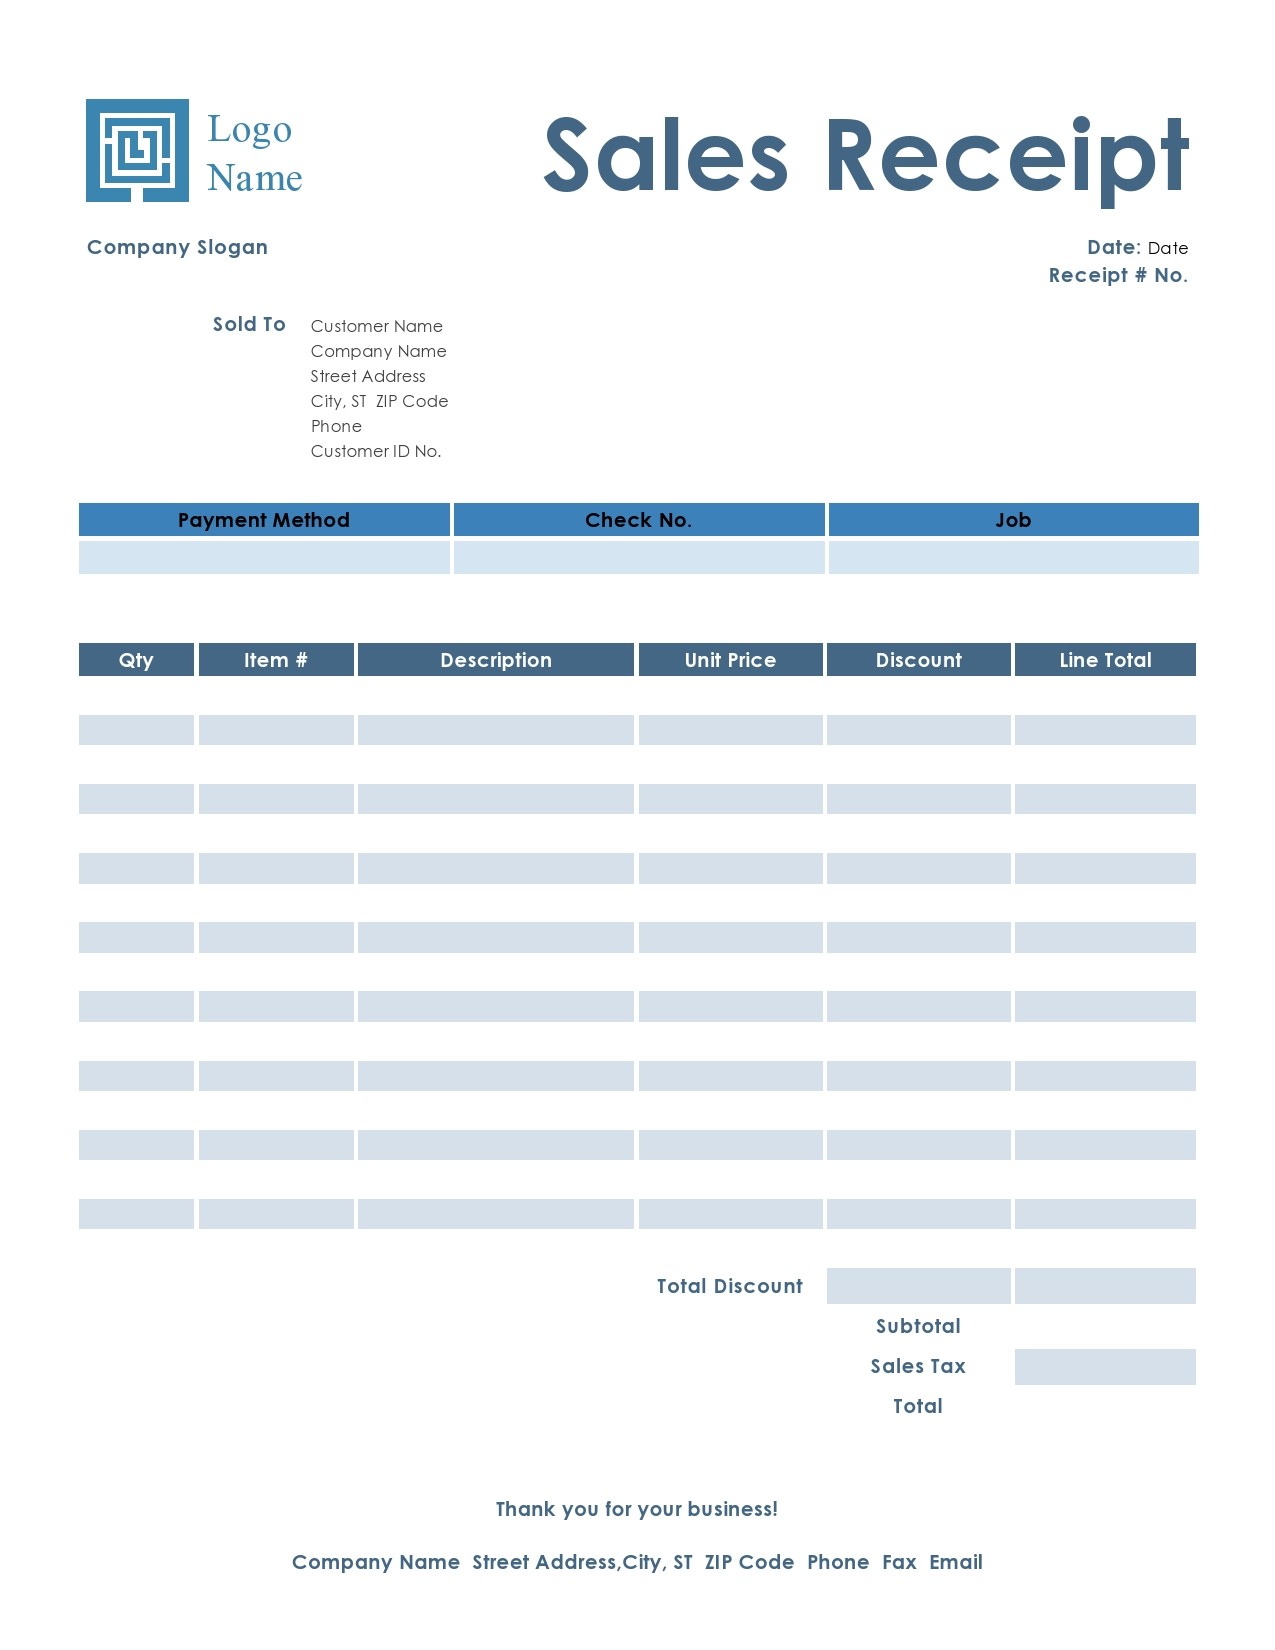 30 Editable Purchase Receipt Templates Word Excel TemplateLab